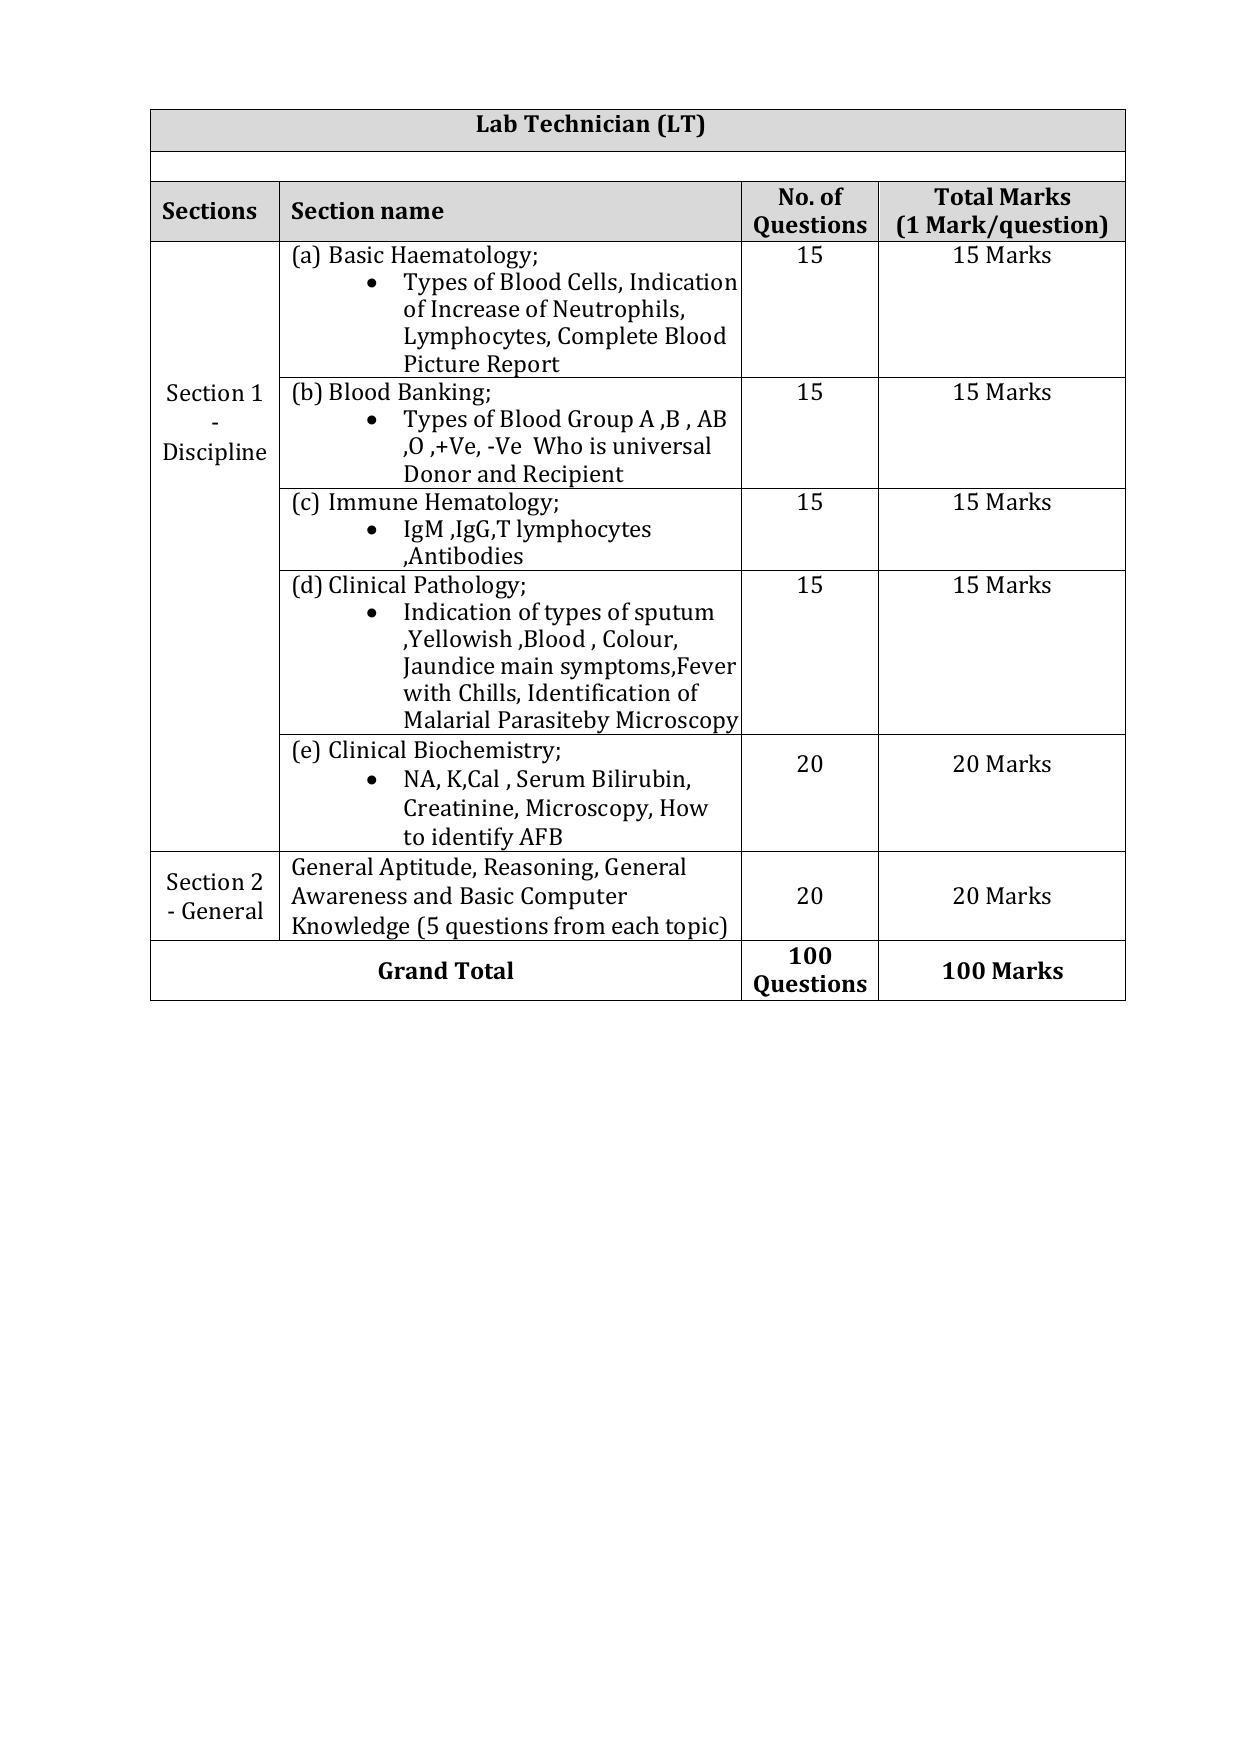 Download NHM UP Lab Technician, STS & STLS Syllabus - Page 3